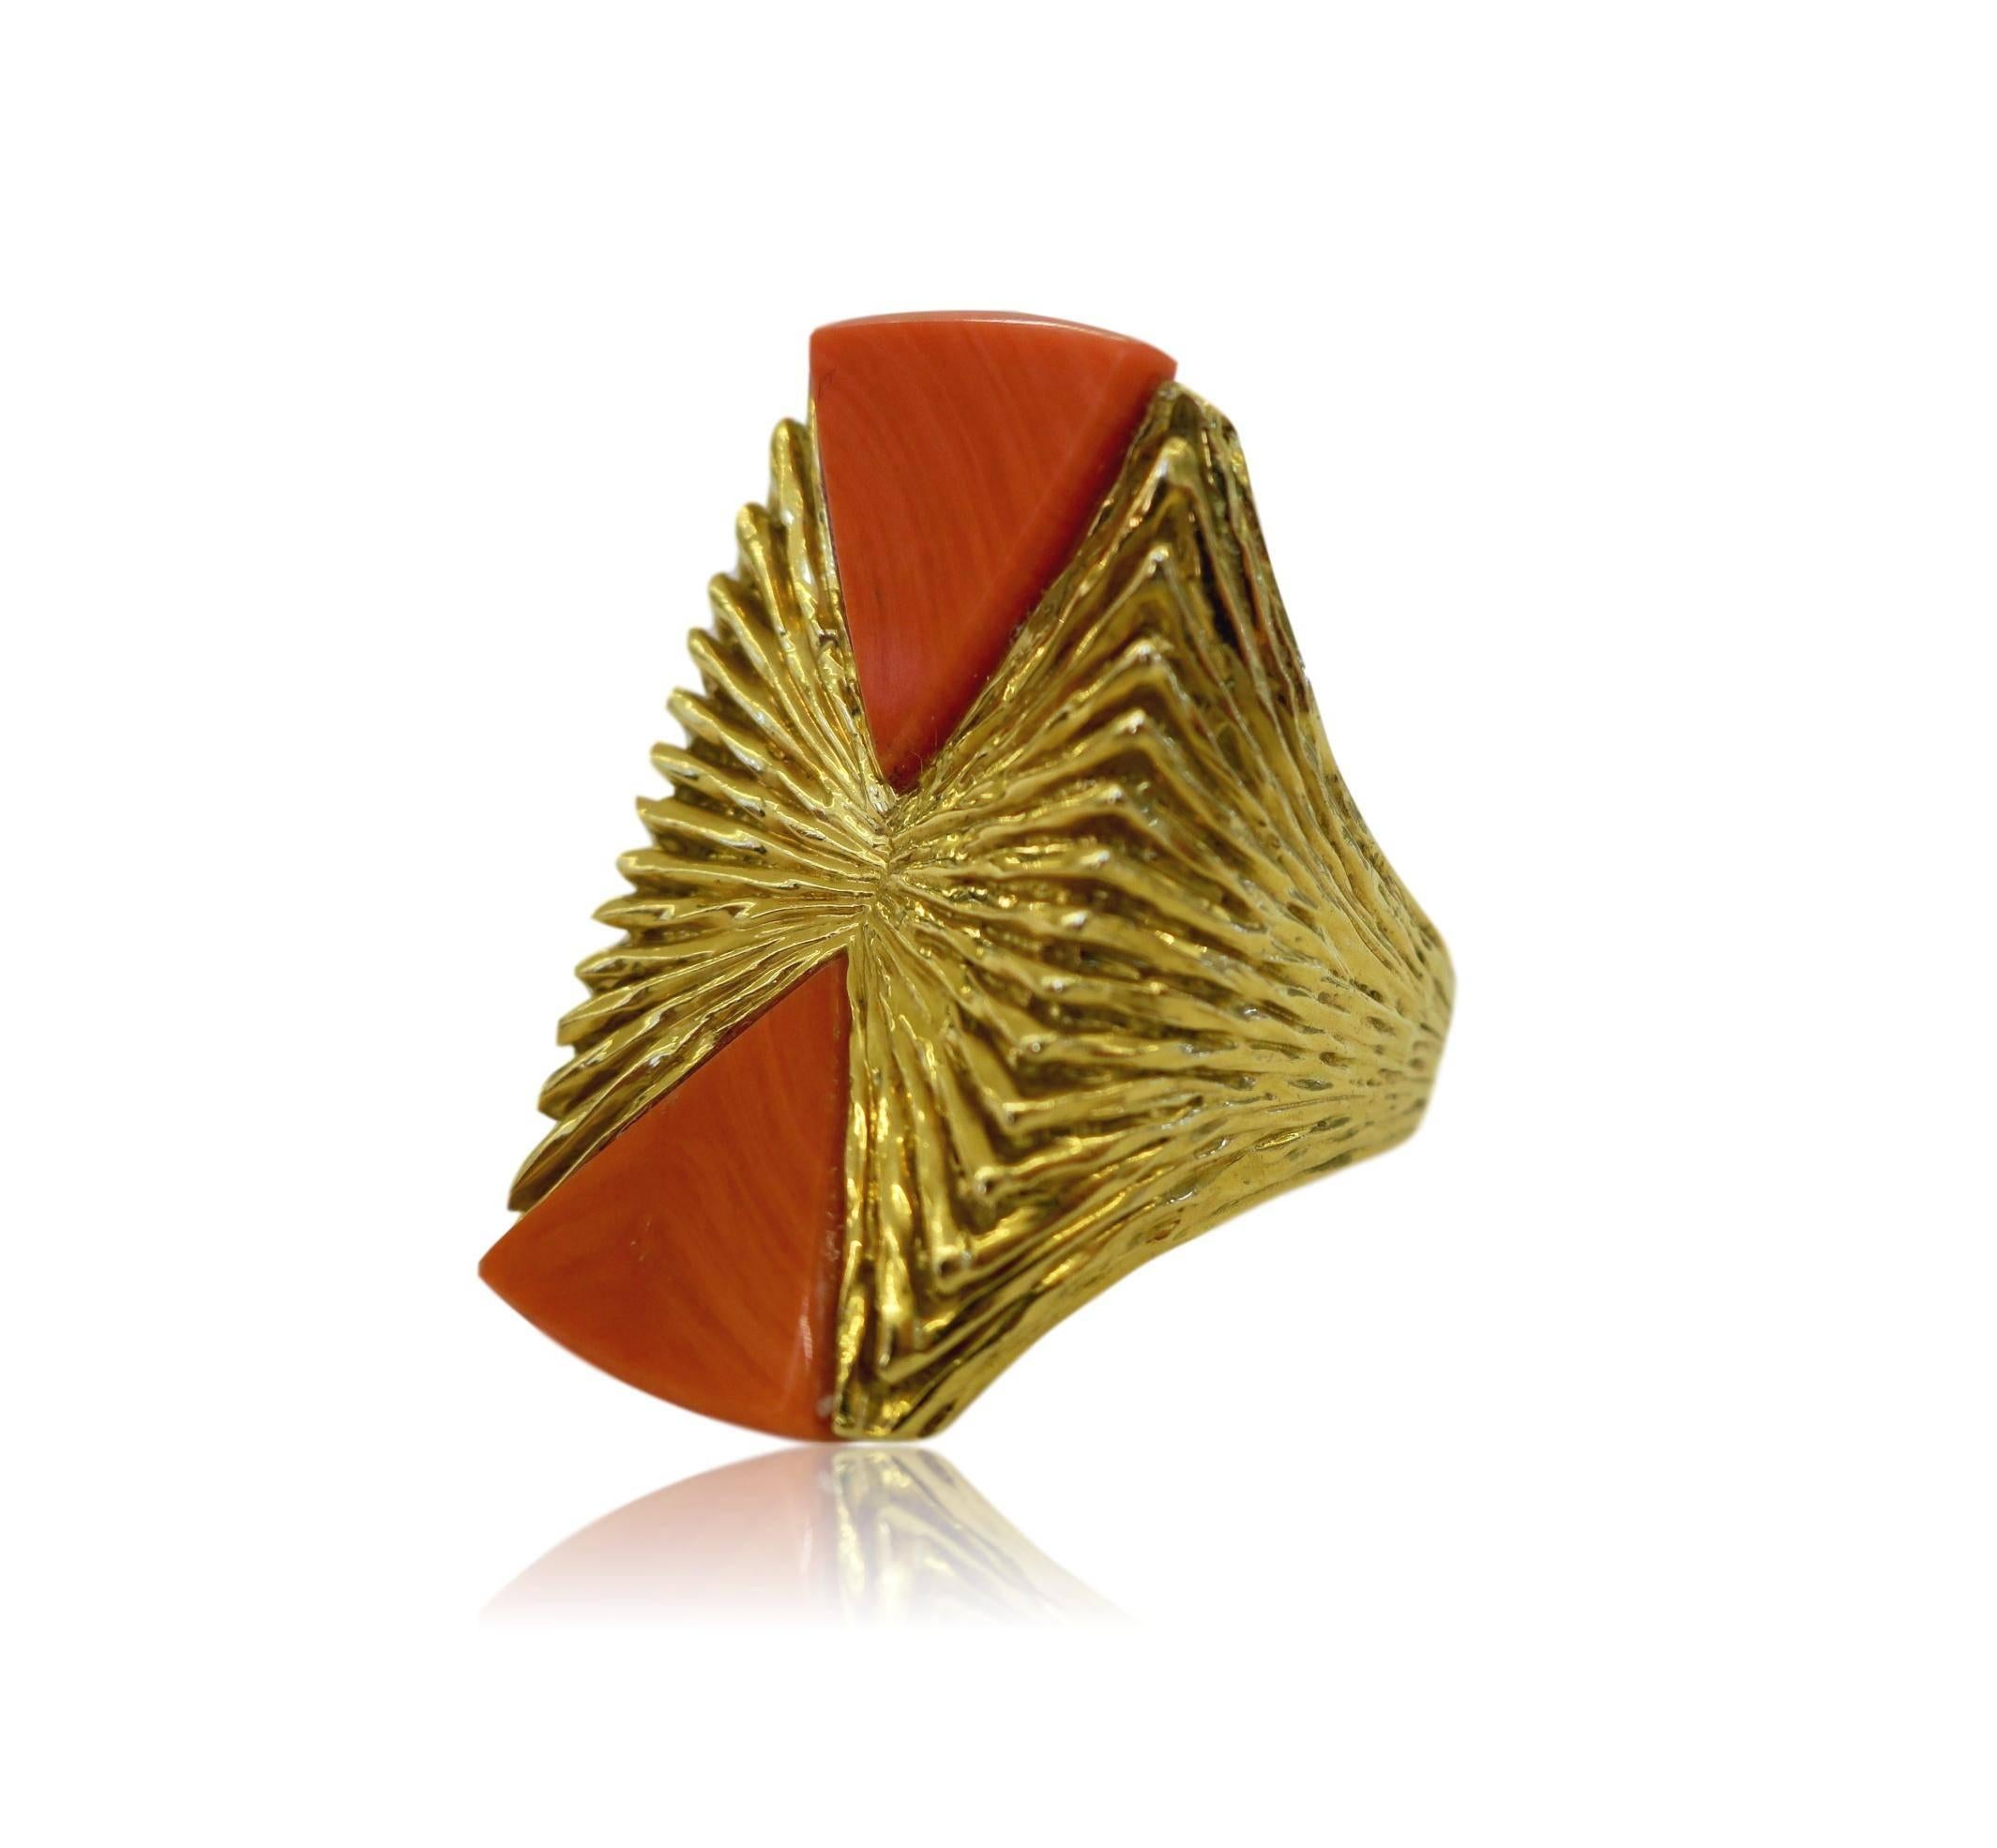 Coral and 18k Gold statement ring by Kutchinsky. The 1 3/16